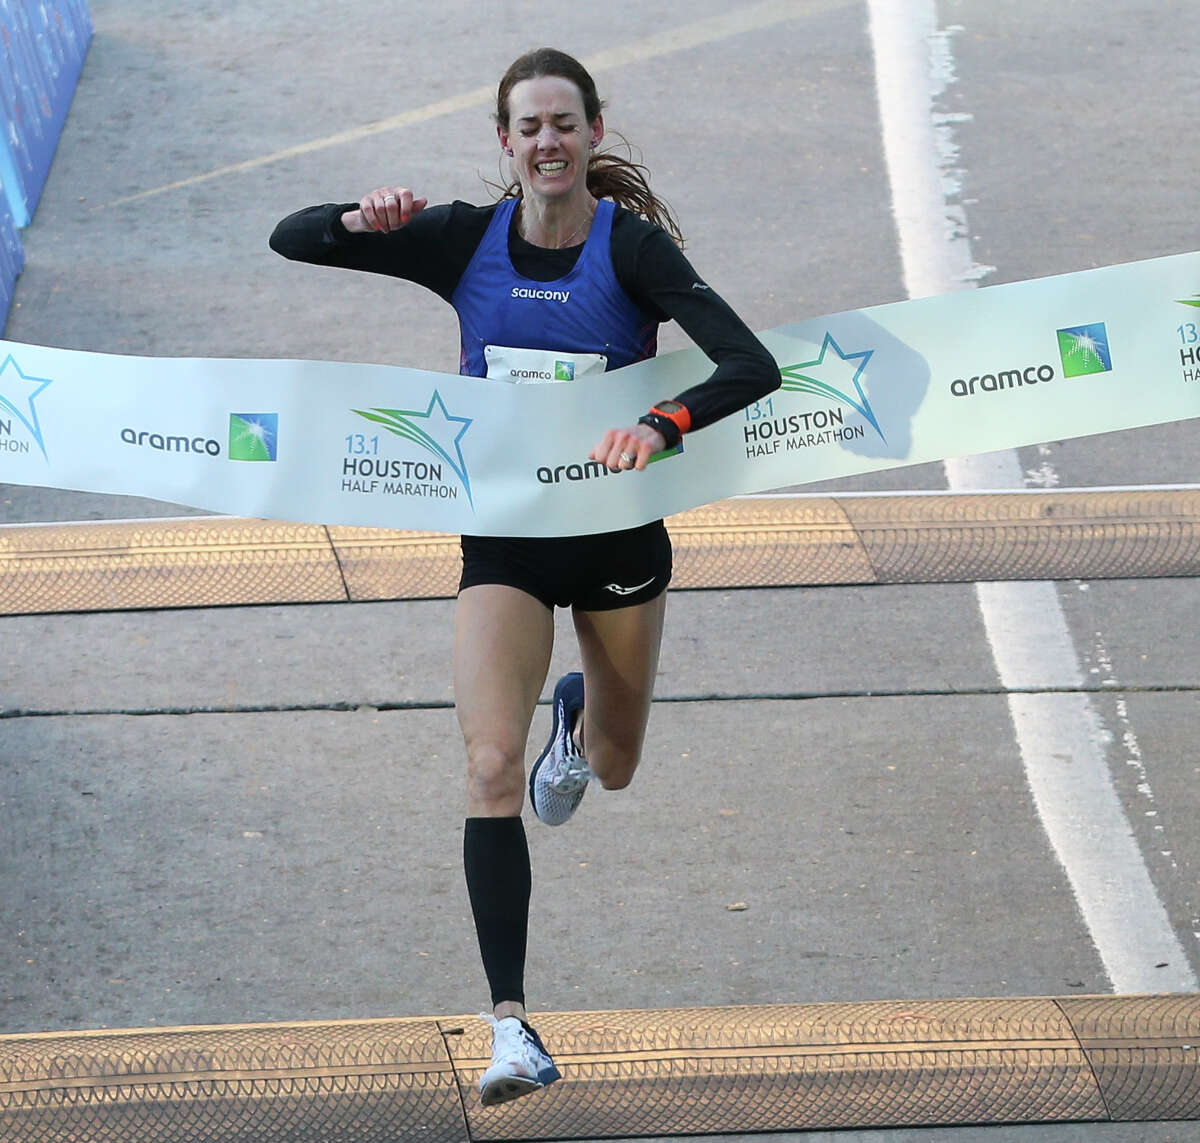 American runner Molly Huddle crosses the Aramco Half Marathon finish line on Sunday, Jan. 14, 2018, in Houston. Huddle broke the U.S. women's half-marathon record with a record in 1:07:26.